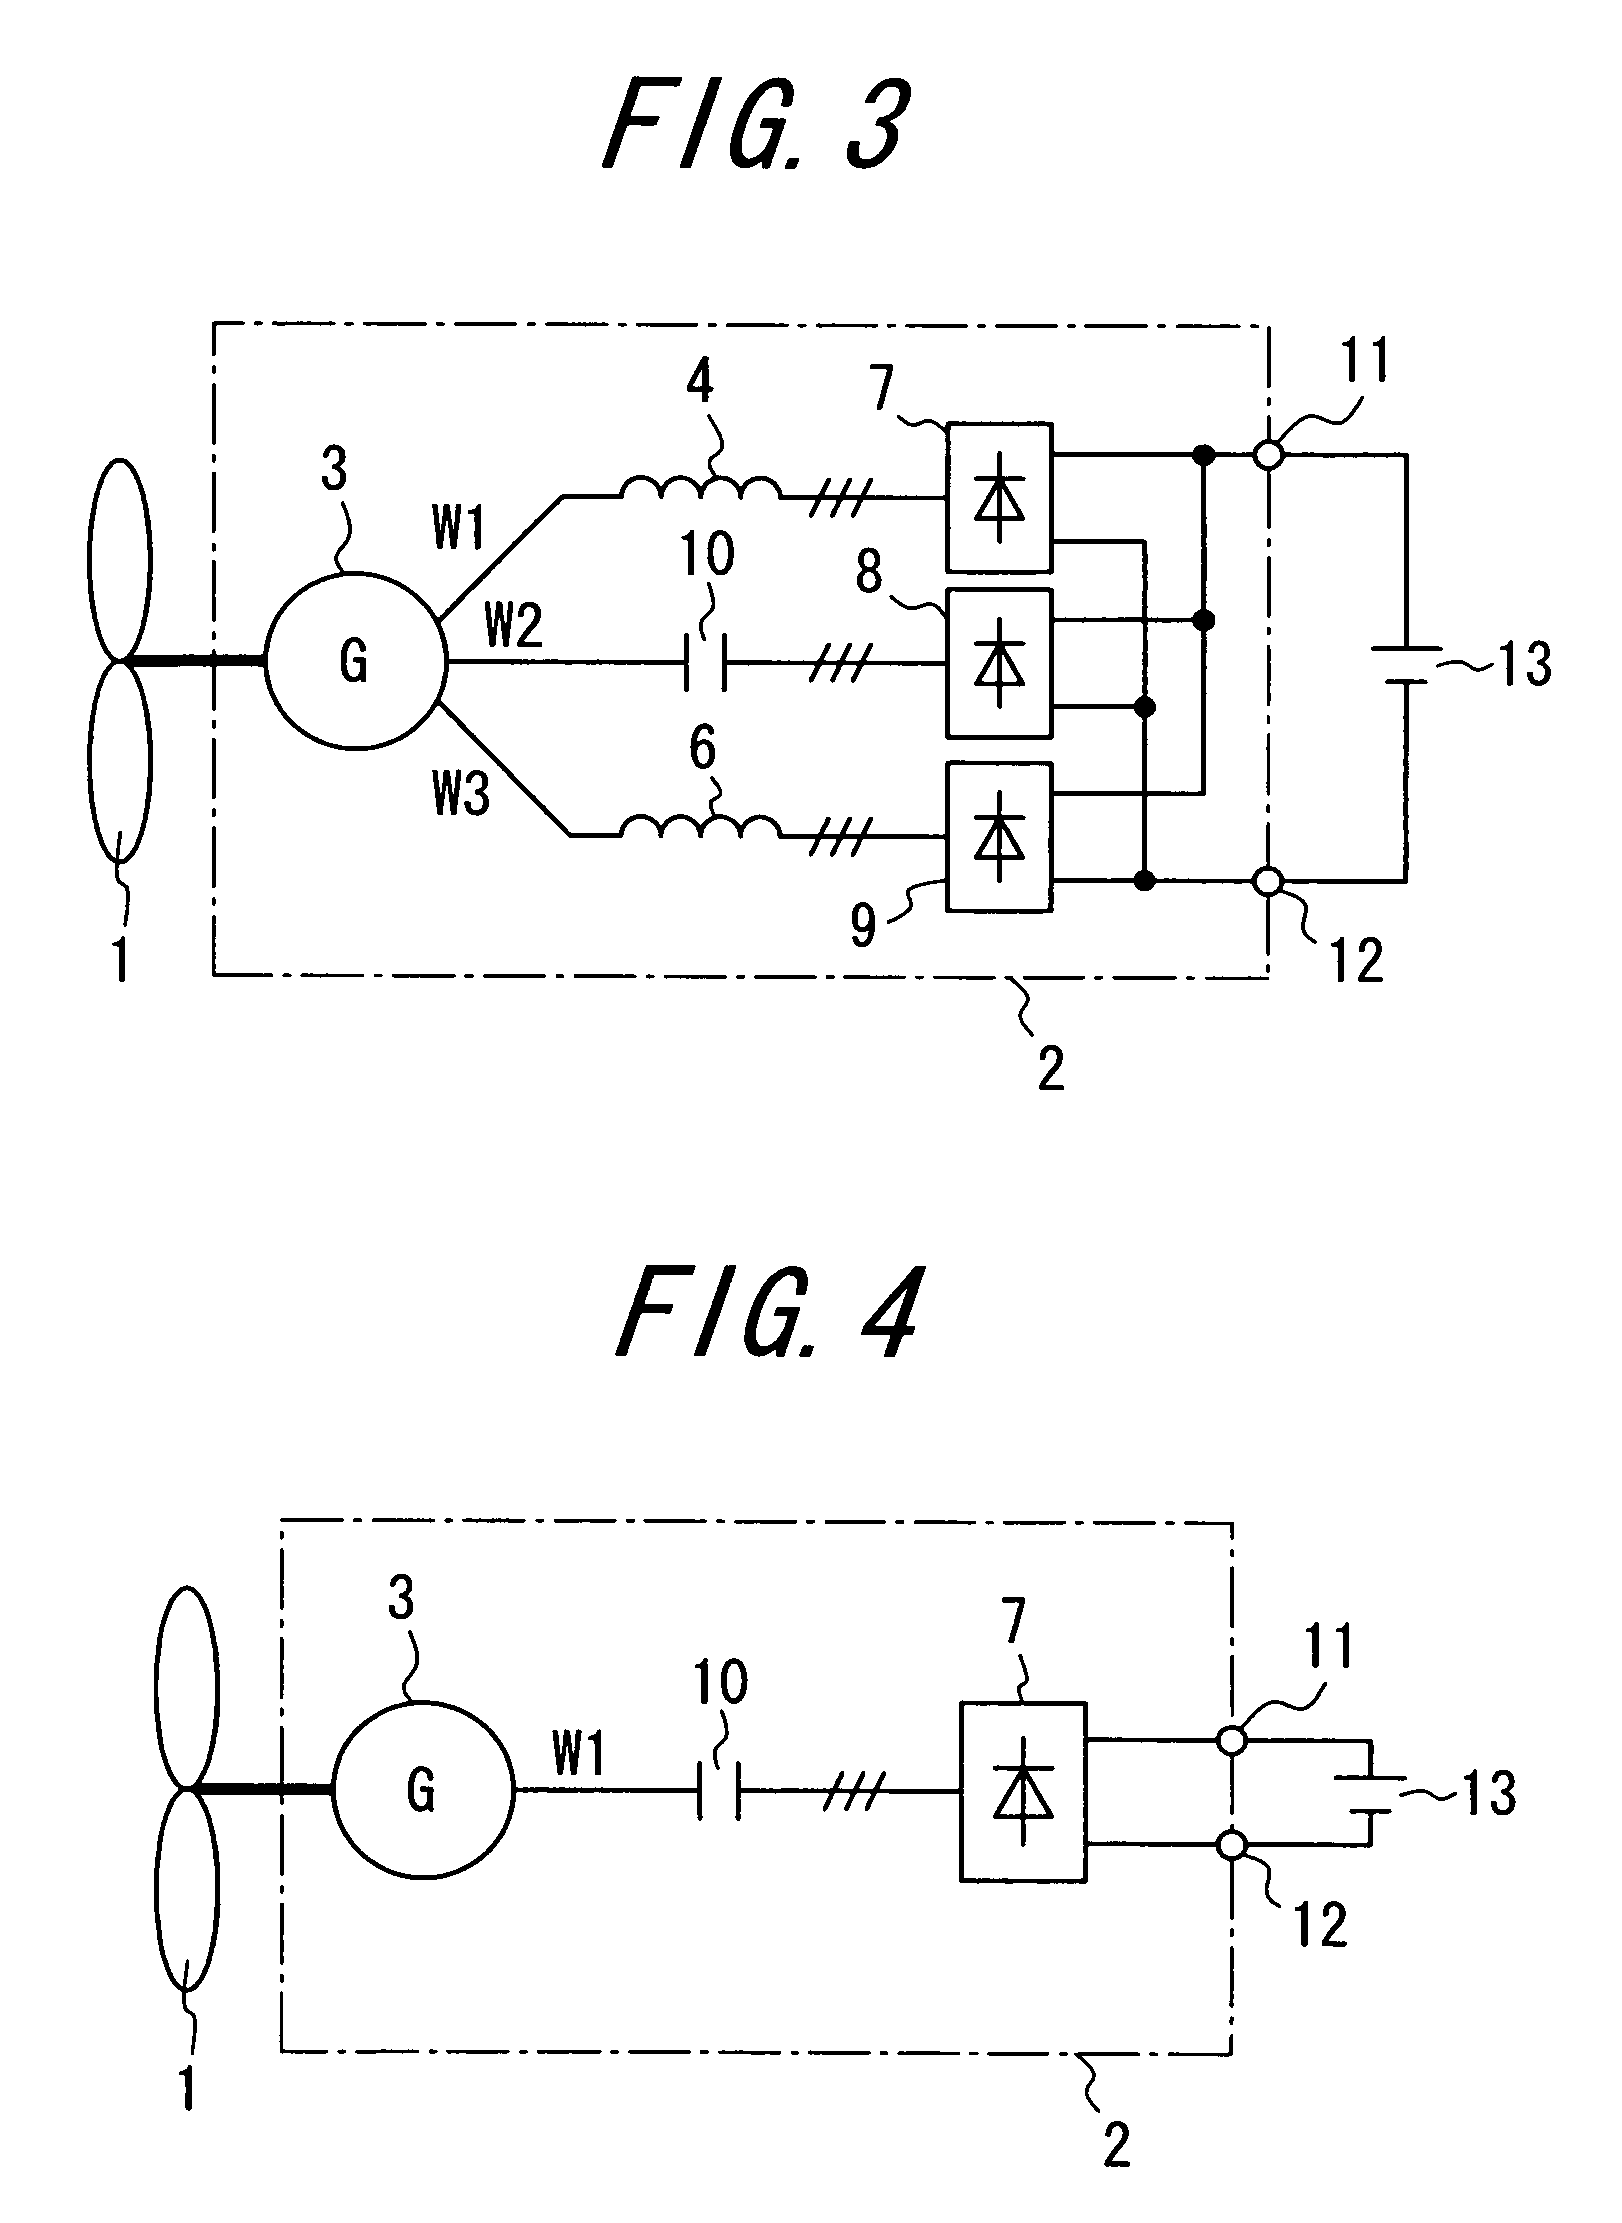 Main circuit of electric power generating apparatus for dispersed power supply